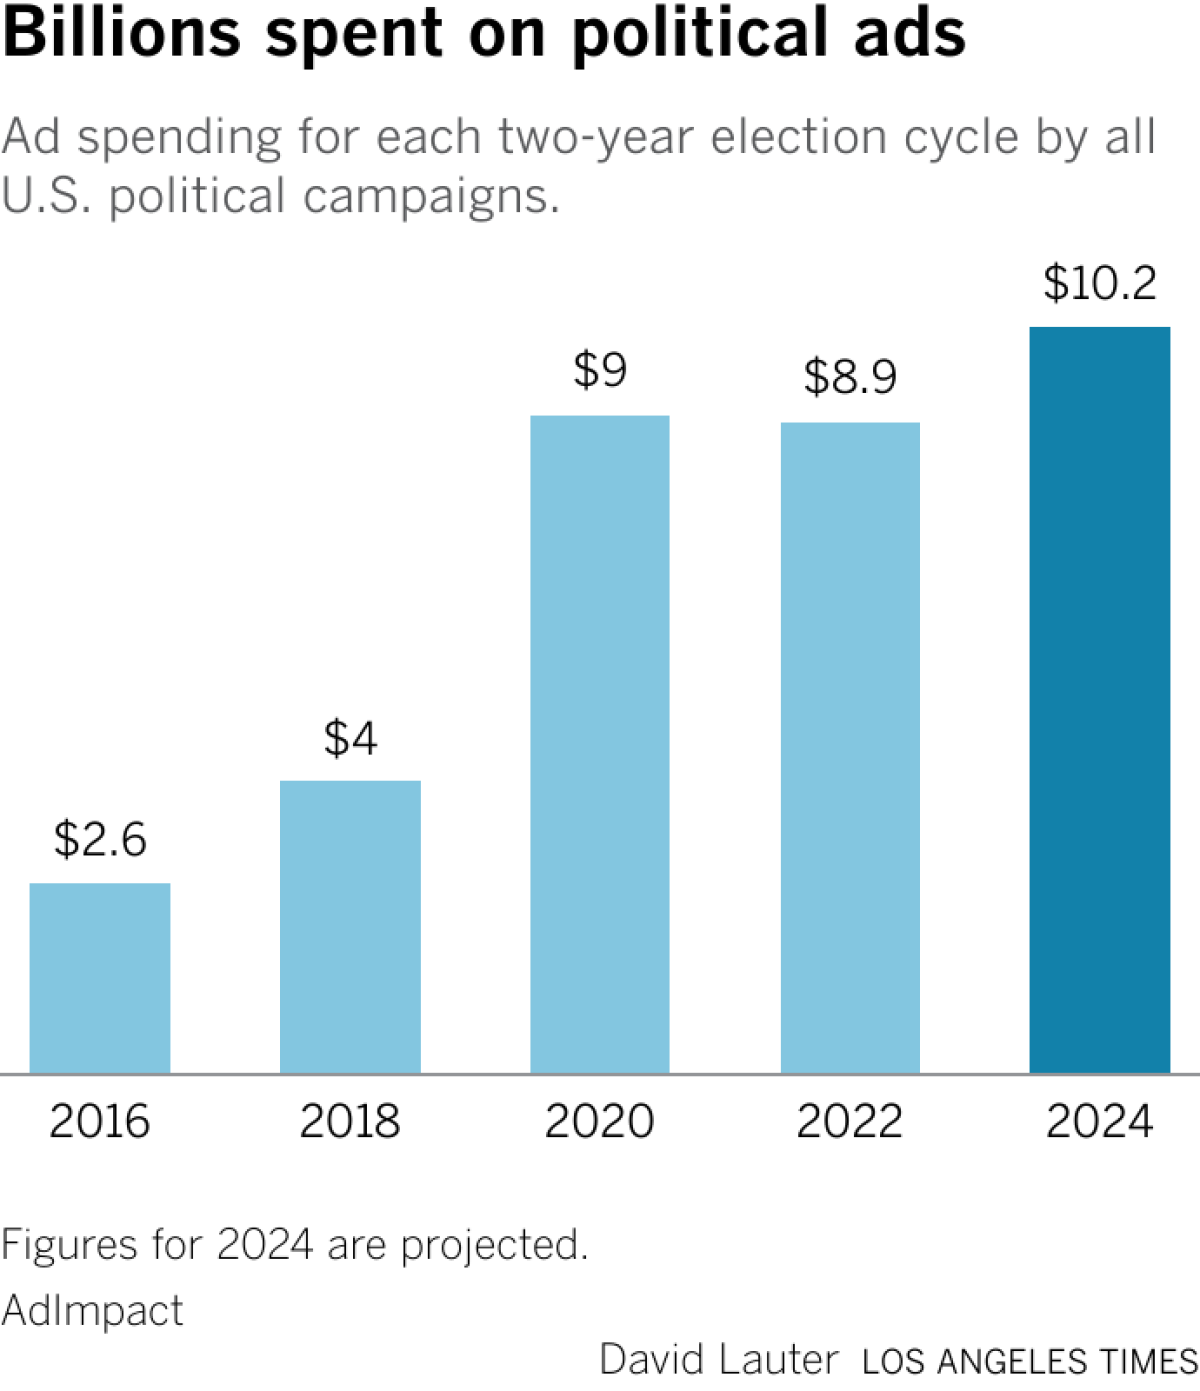 Ad spending for each two-year election cycle by all U.S. political campaigns.